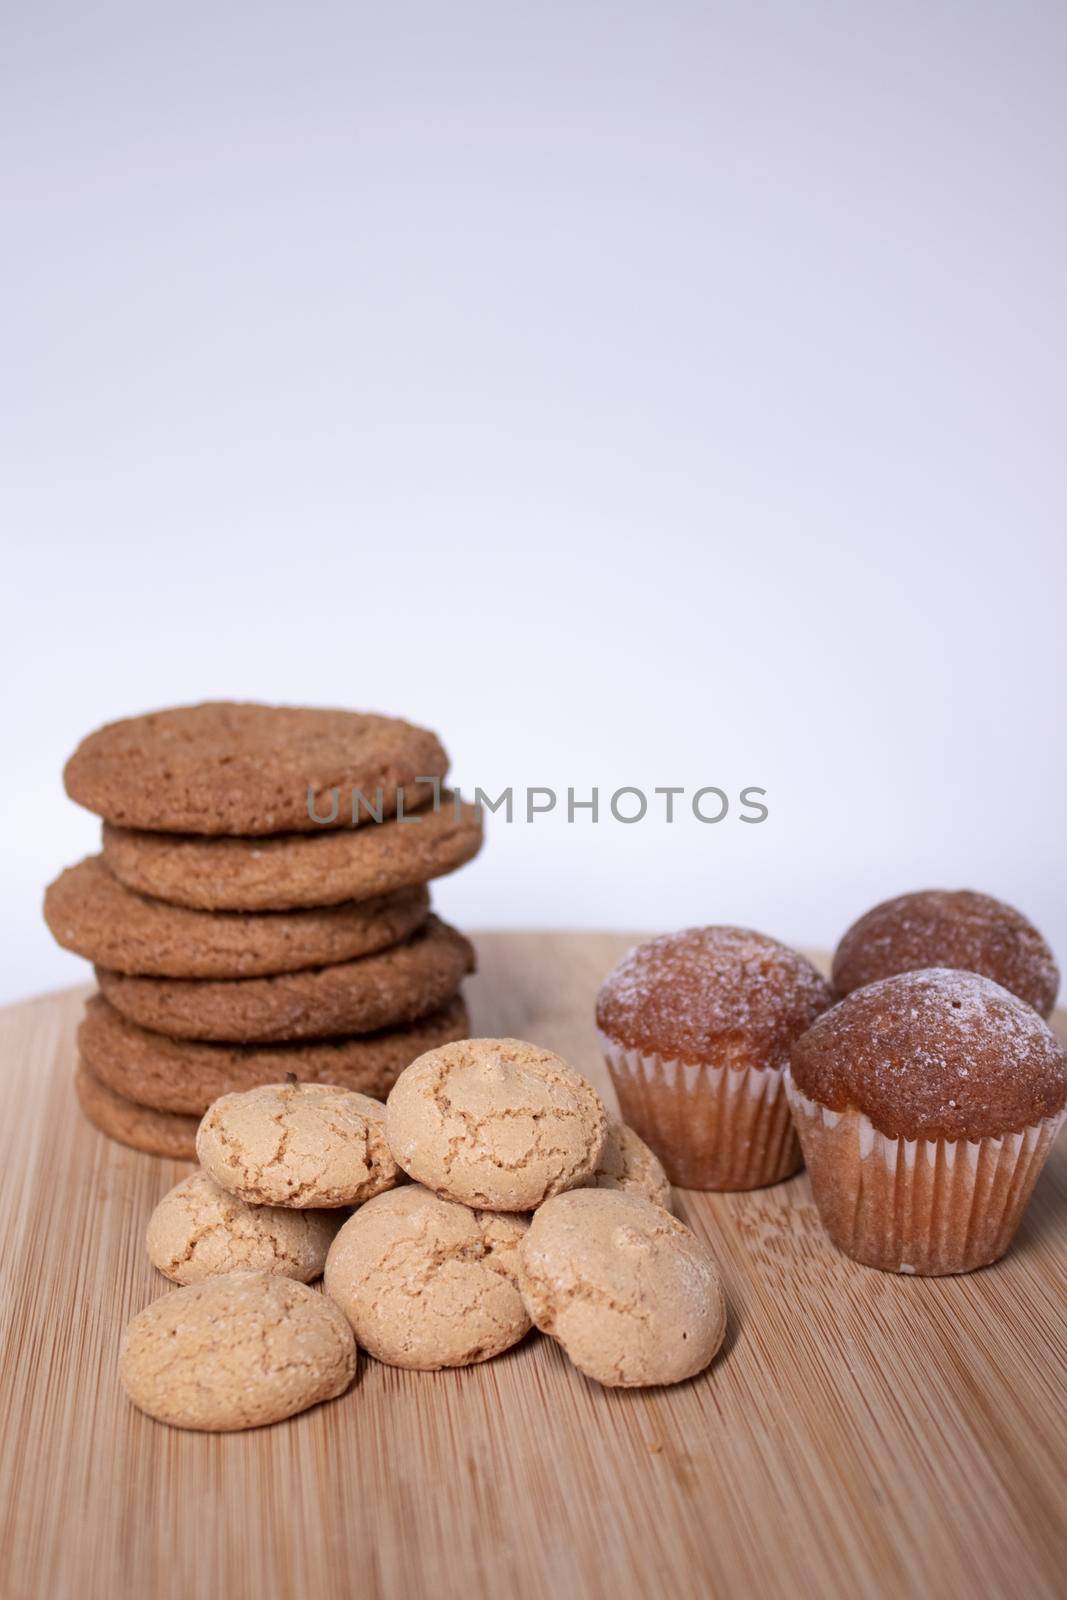 muffins, almond amaretti and oat cookies on wooden stand board. concept of sweet bakery